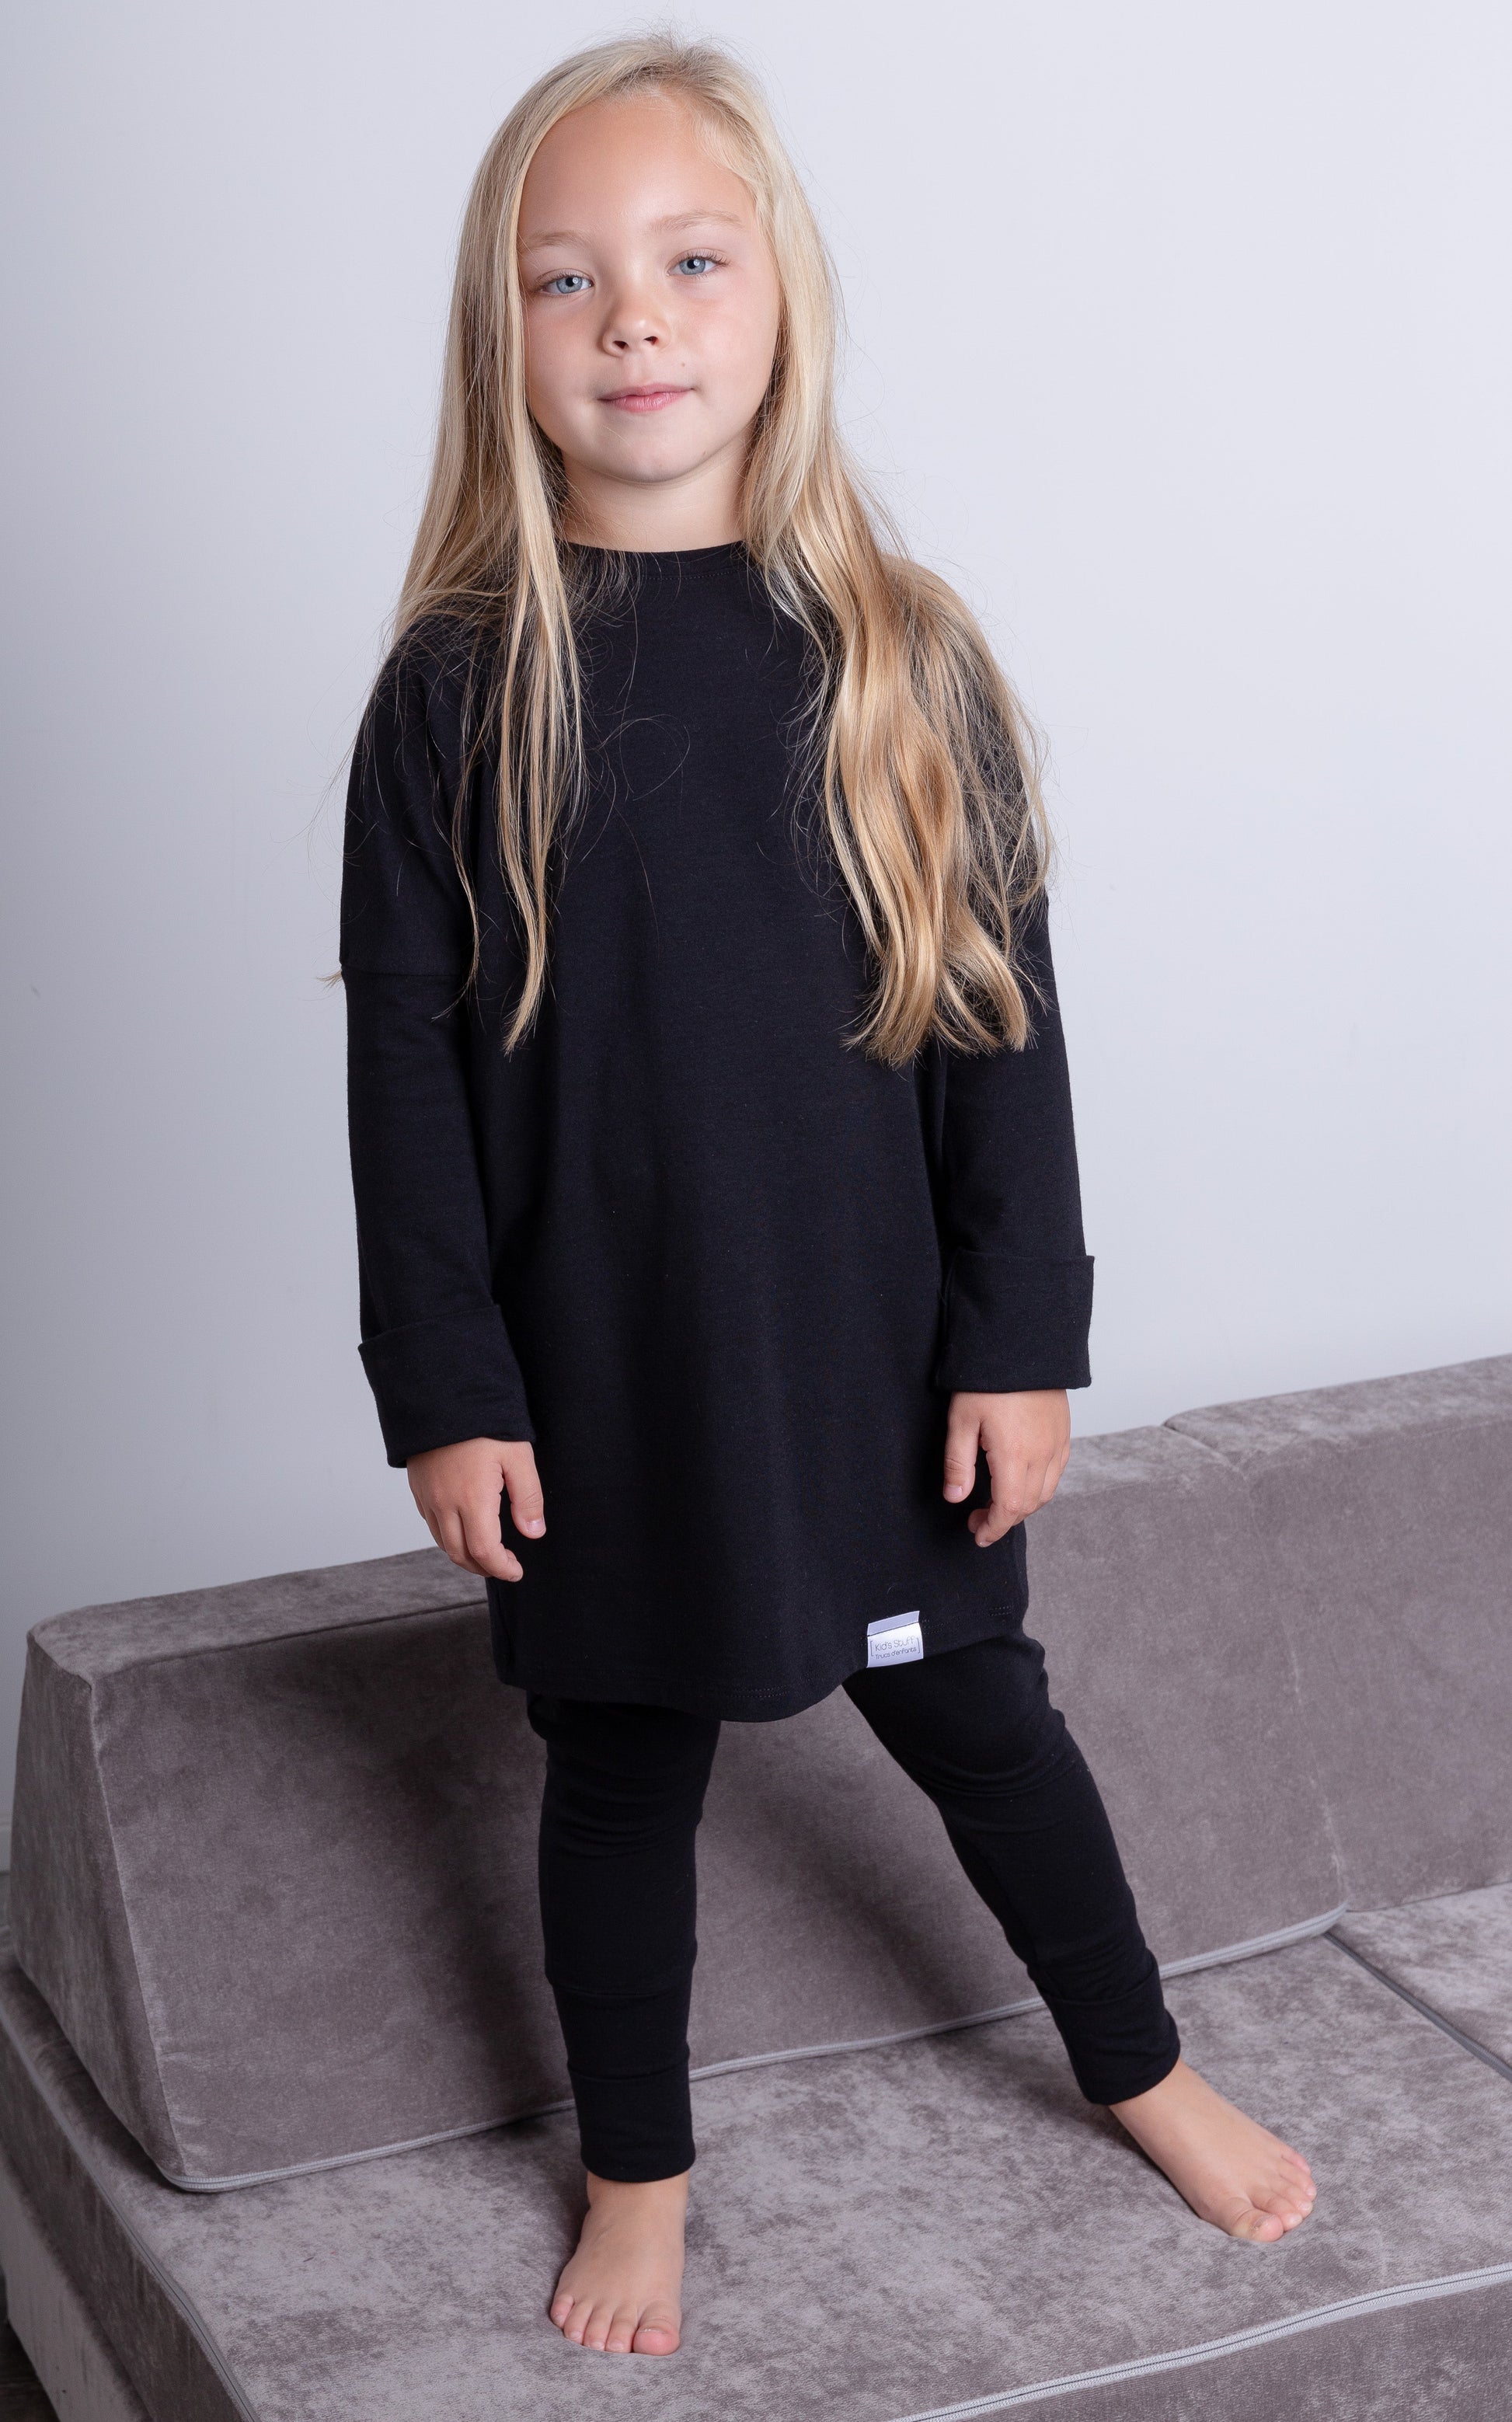 Lyocell and organic cotton grow-with-me leggings Kids, Trucs d'enfants